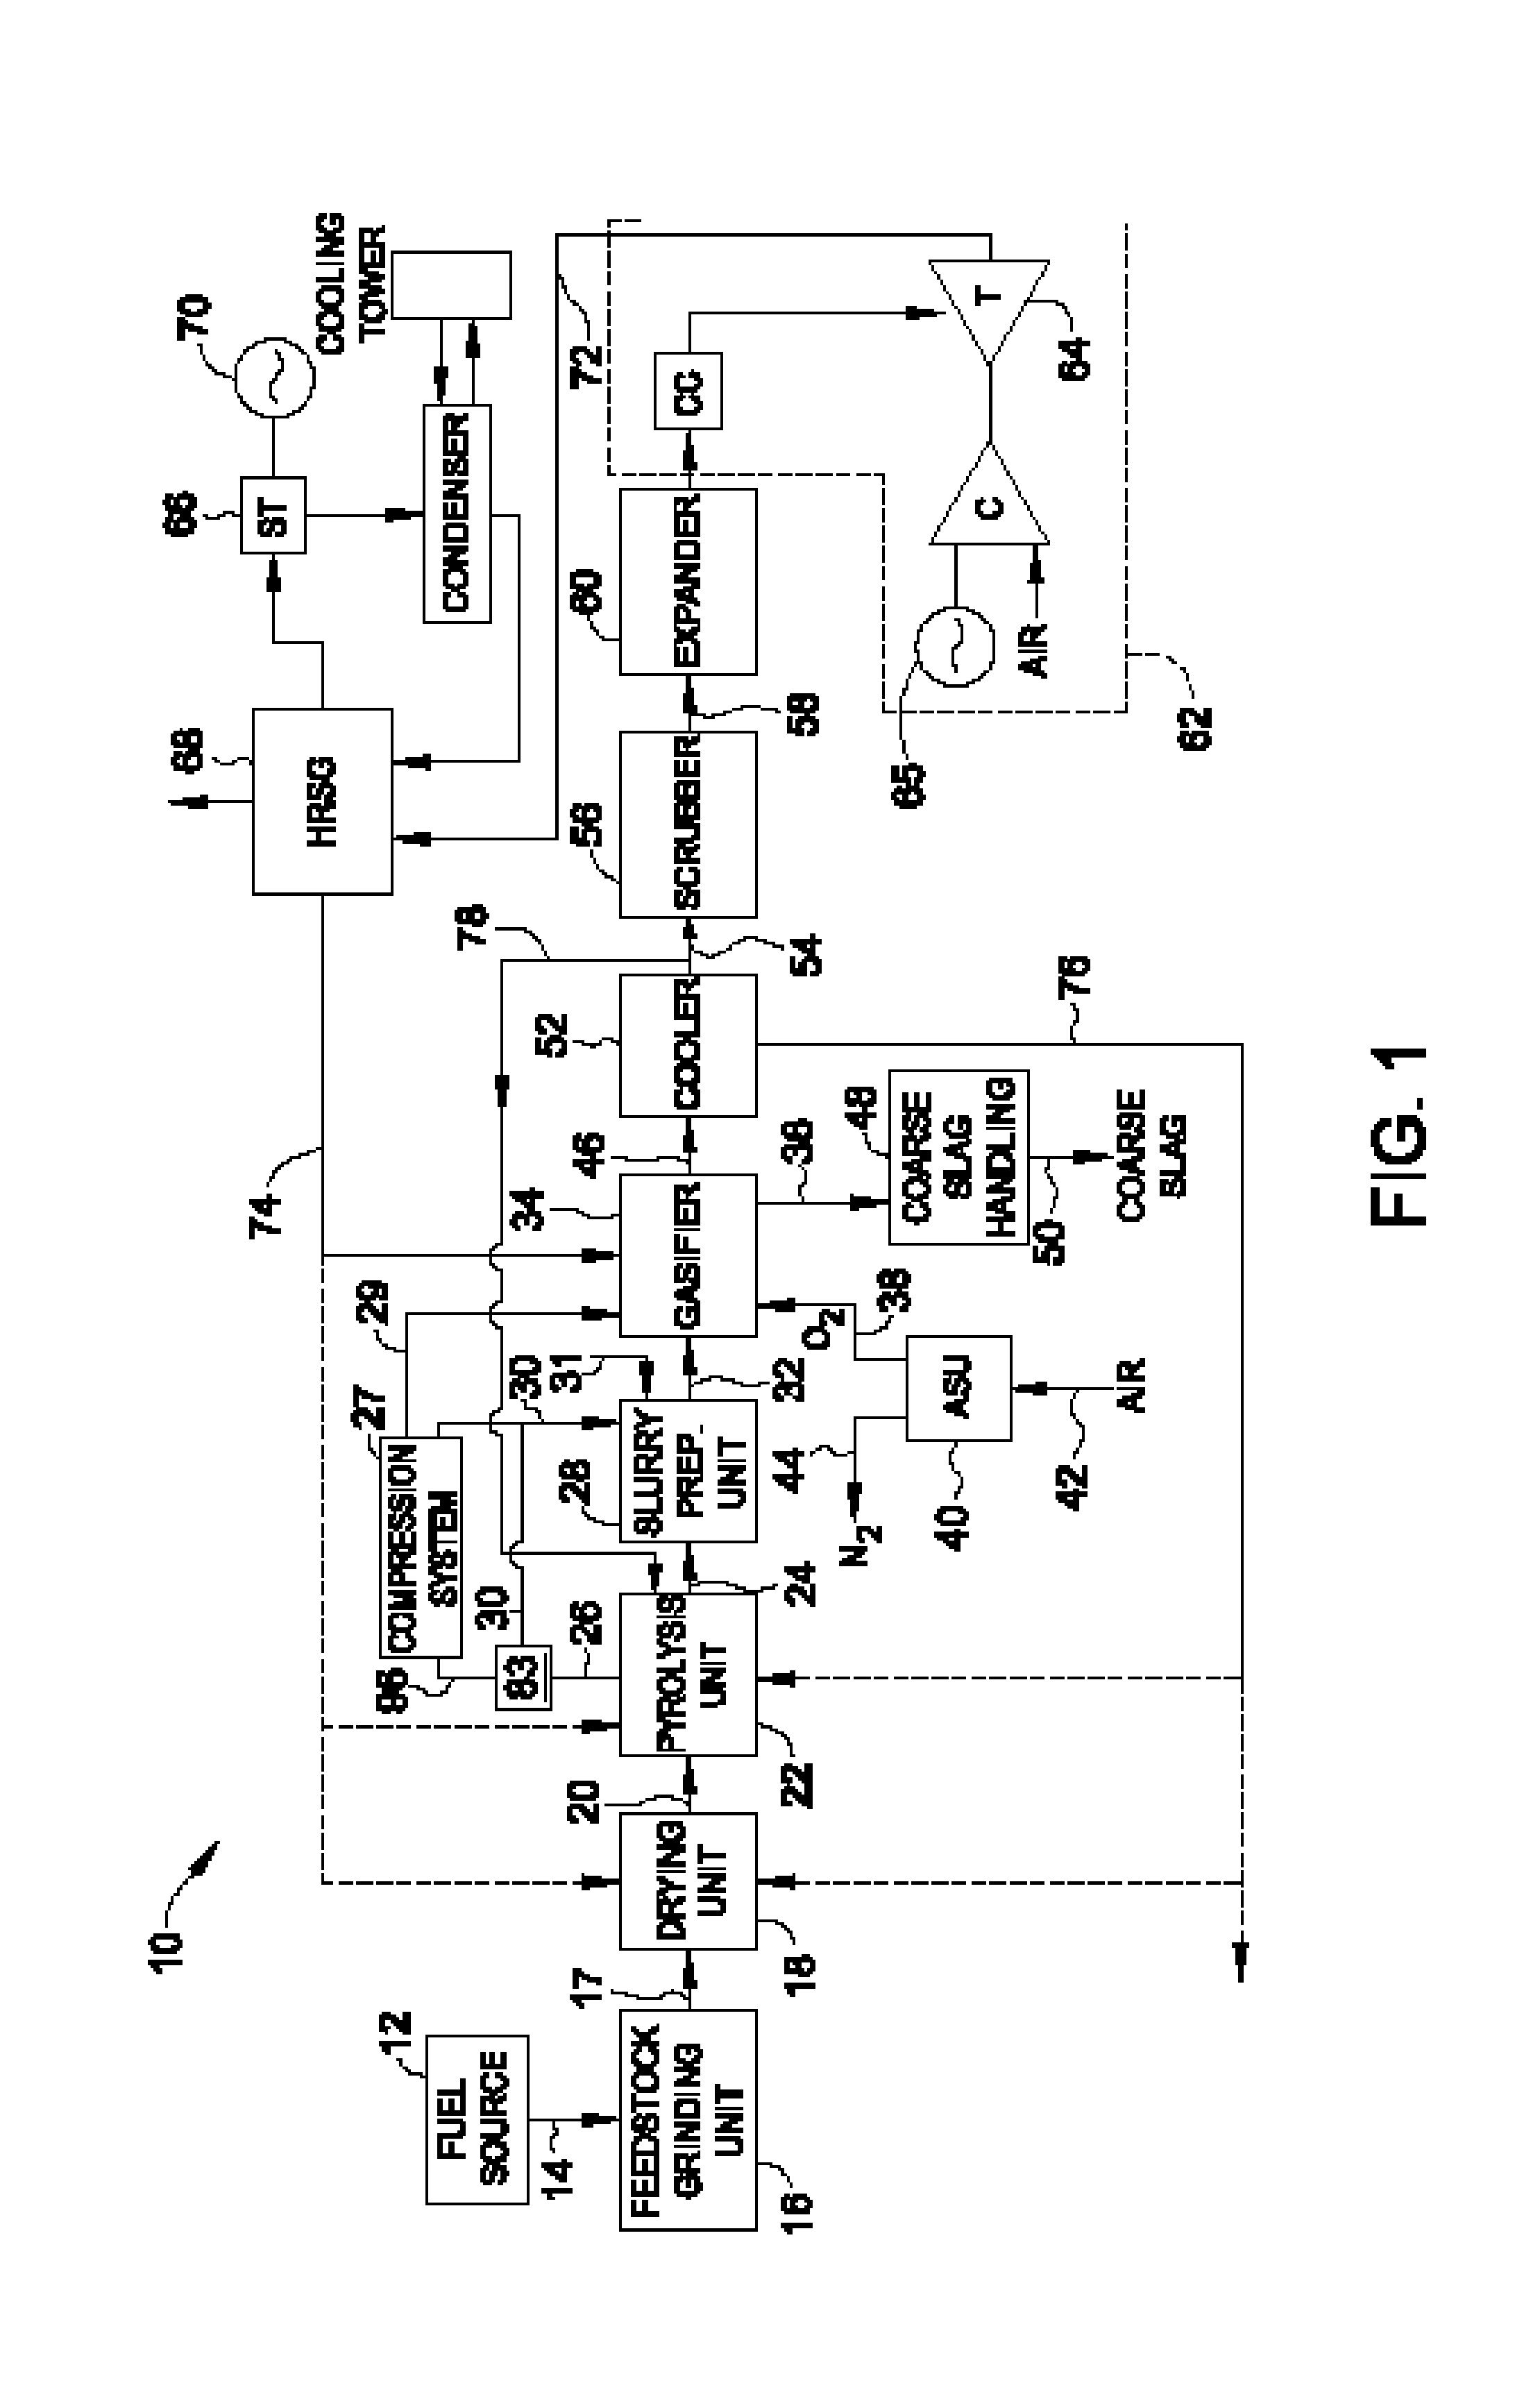 Integrated pyrolysis and entrained flow gasification systems and methods for low rank fuels